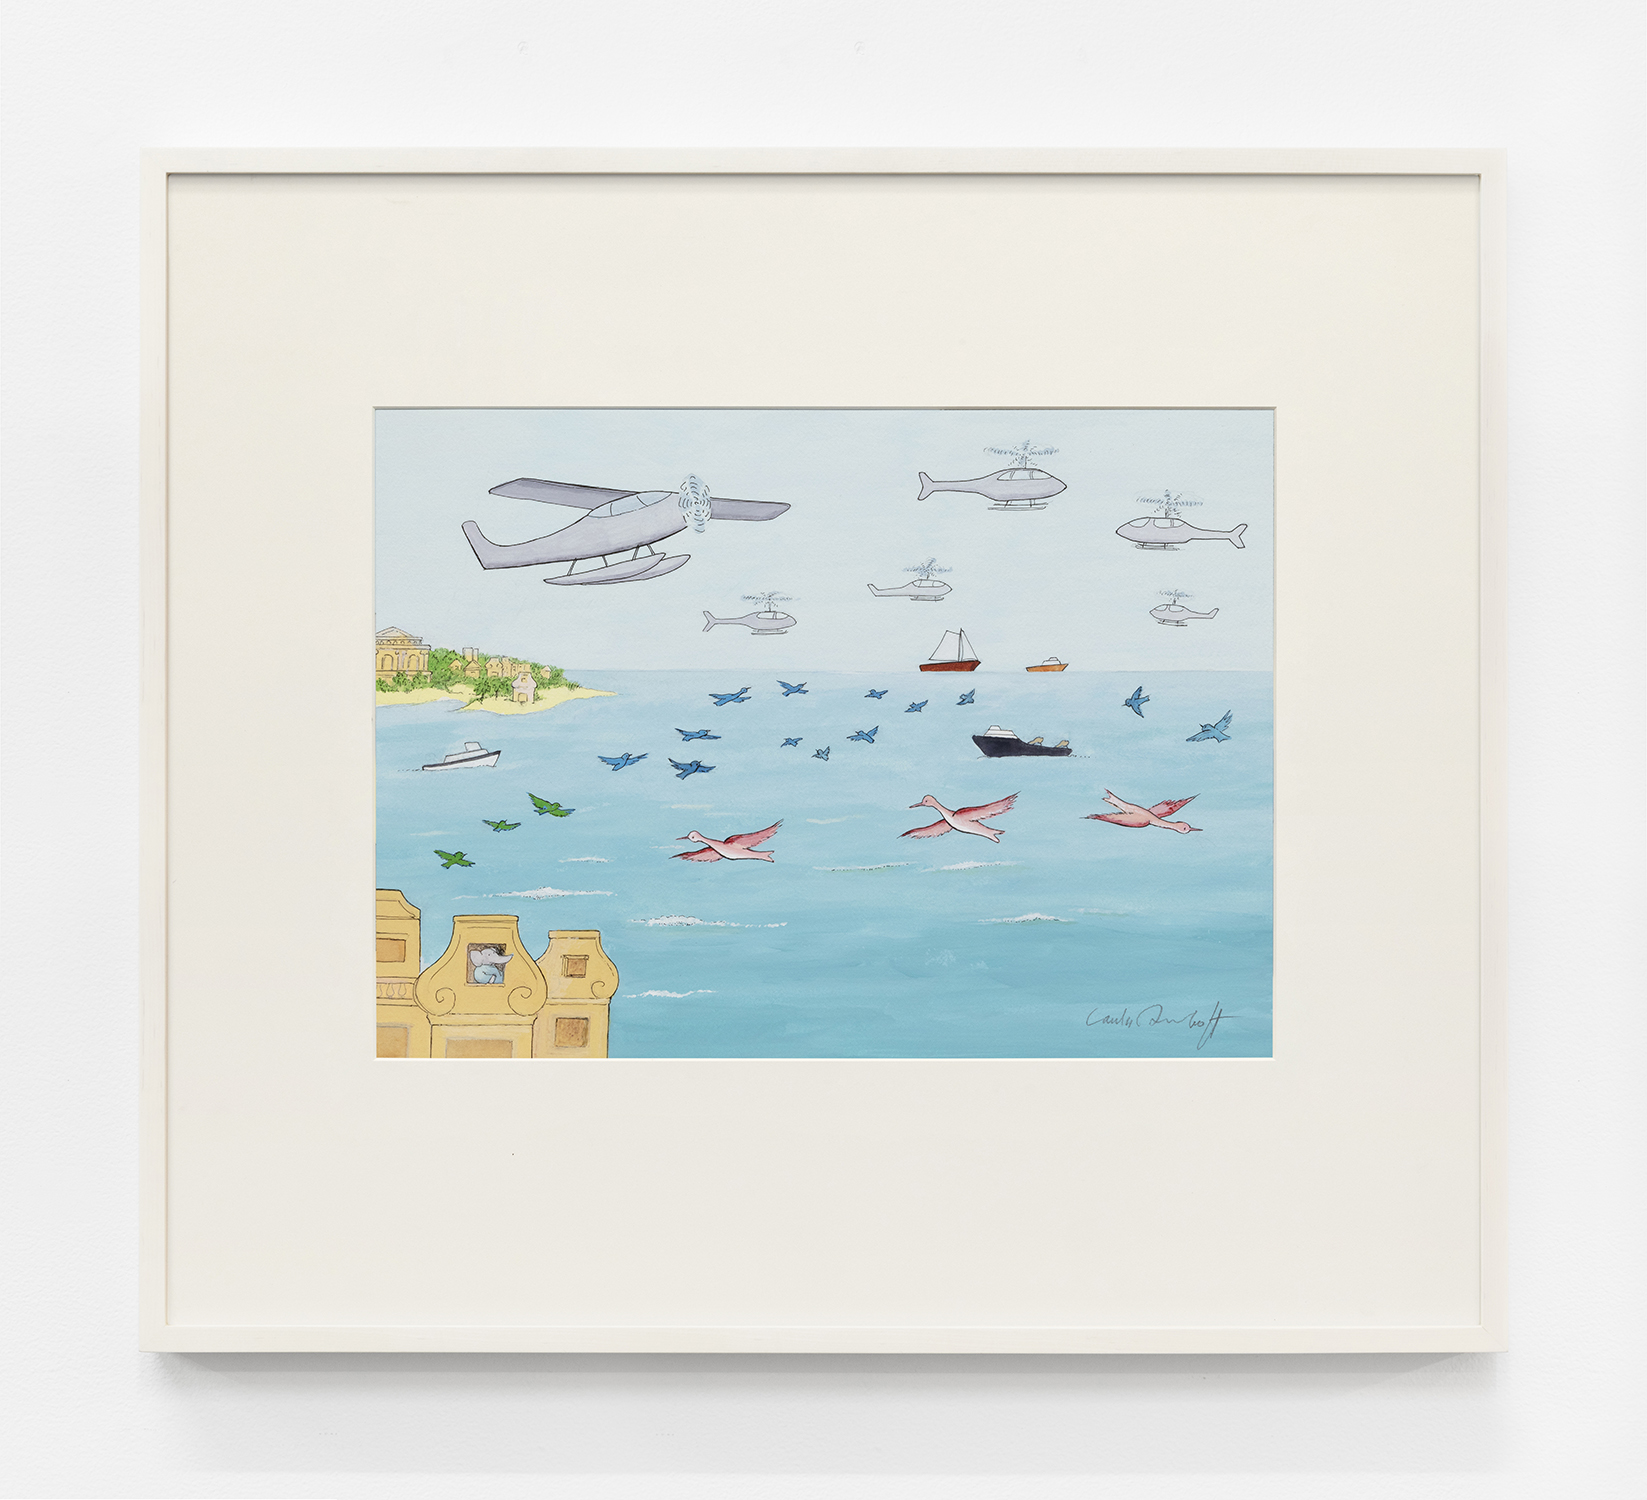 The skies near Celesteville had been filled with planes LDB-BPI-14-19 framed